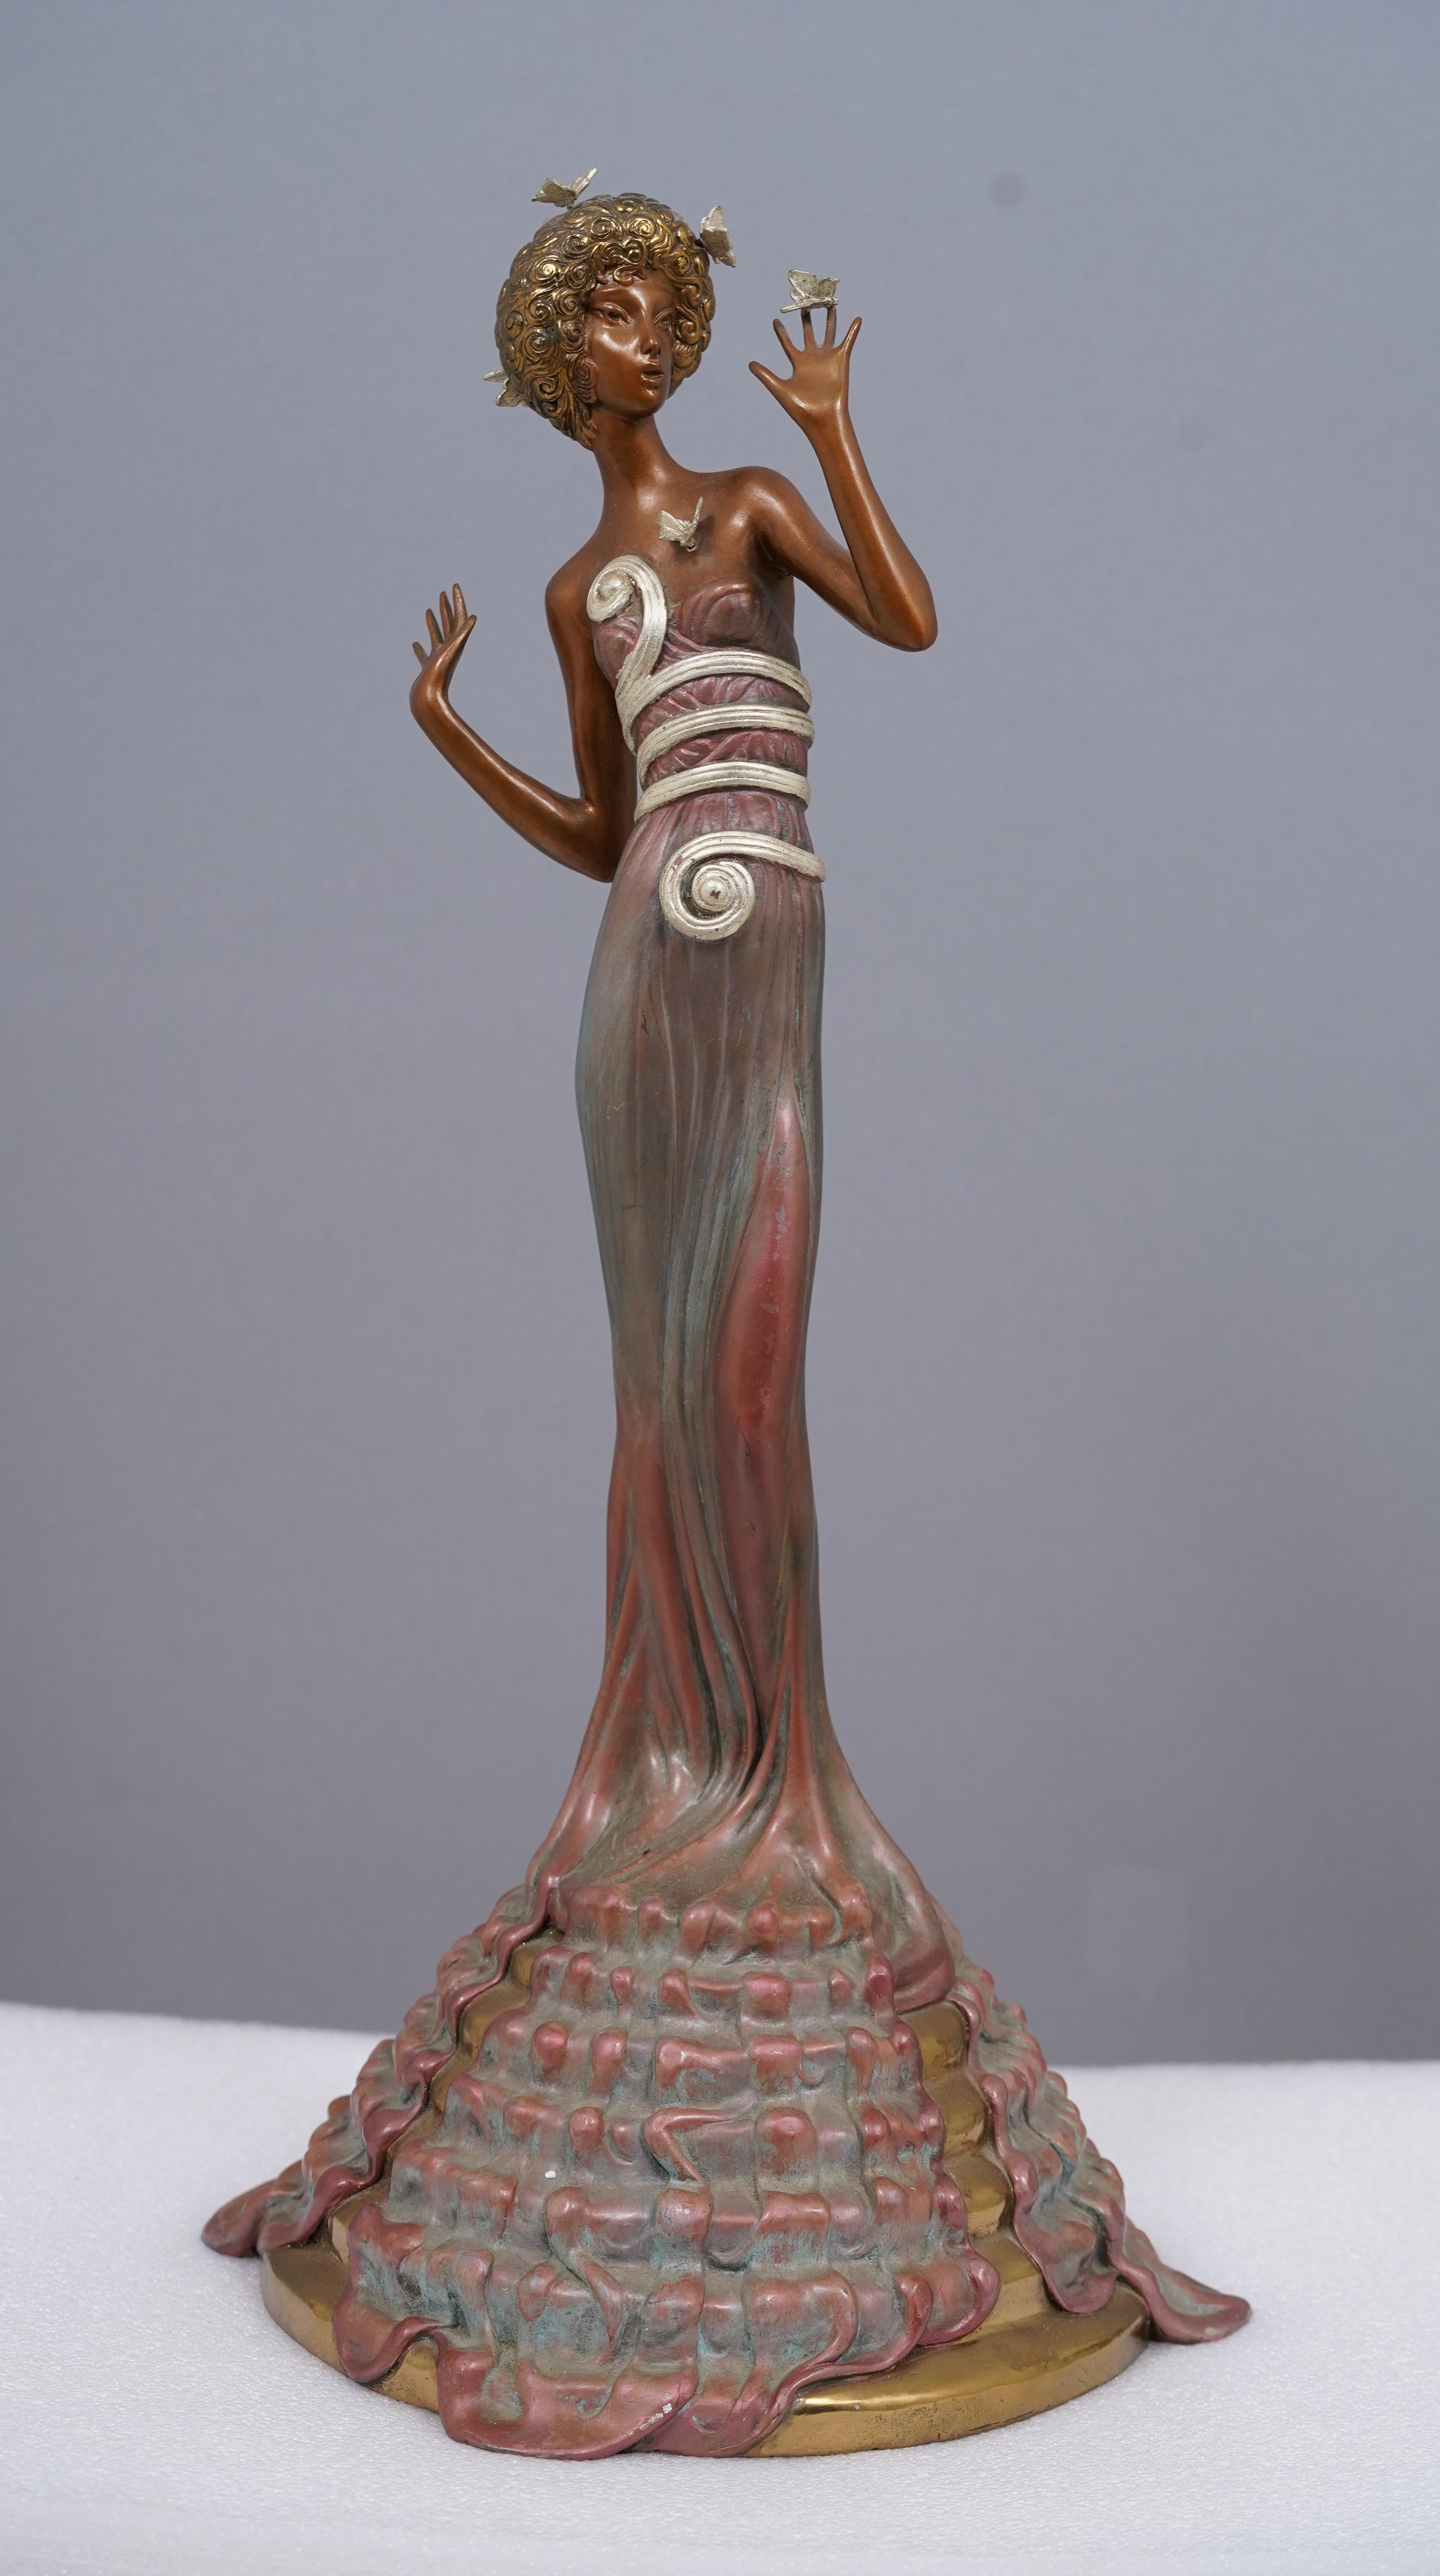 Vintage signed and numbered art deco sculpture by Erte.  Painted Bronze cica 1987.  